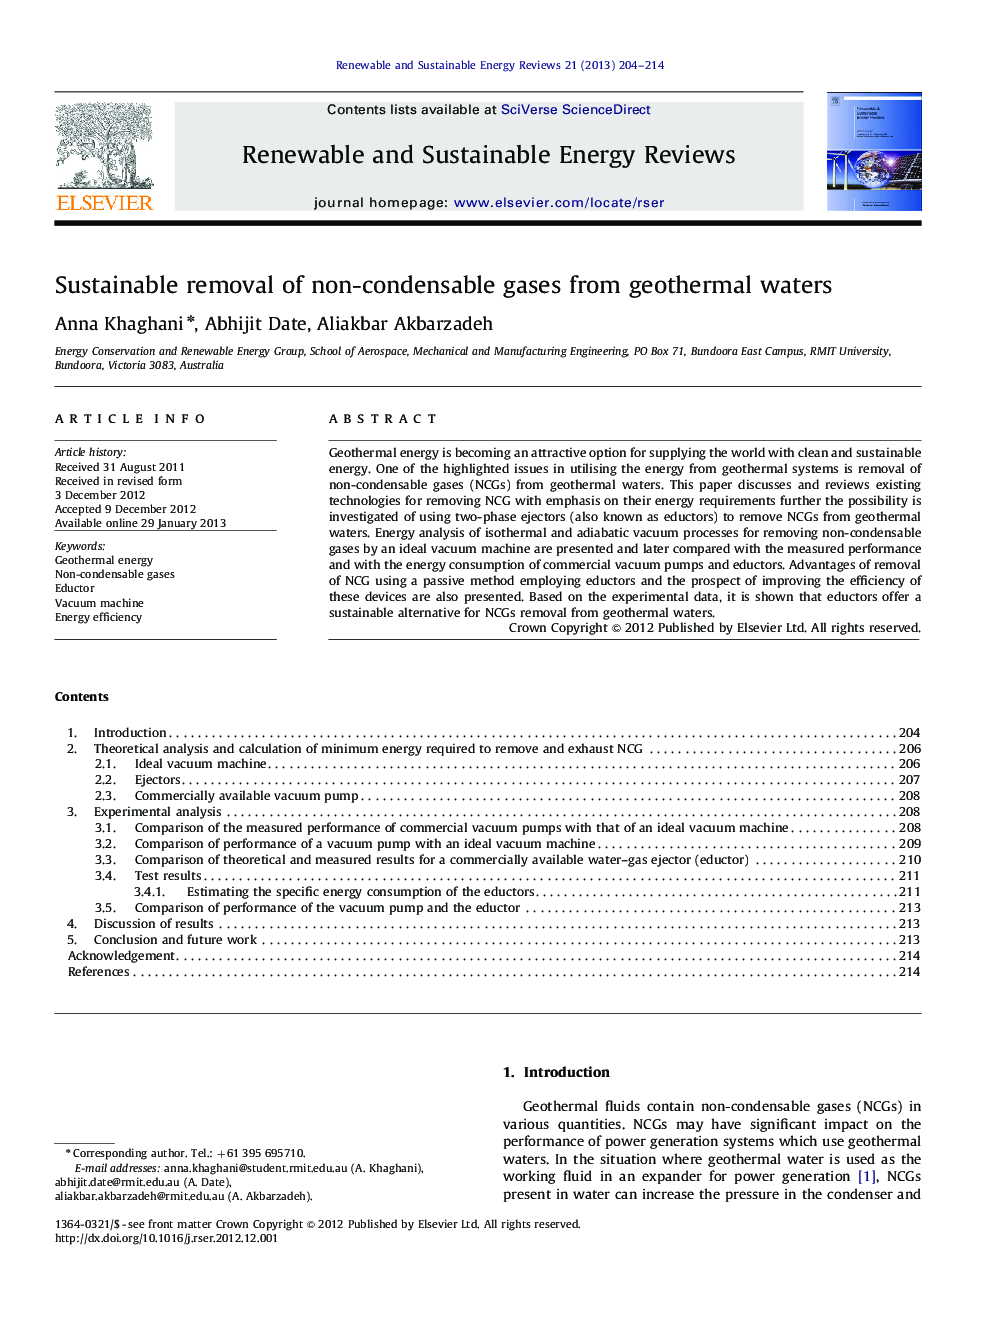 Sustainable removal of non-condensable gases from geothermal waters